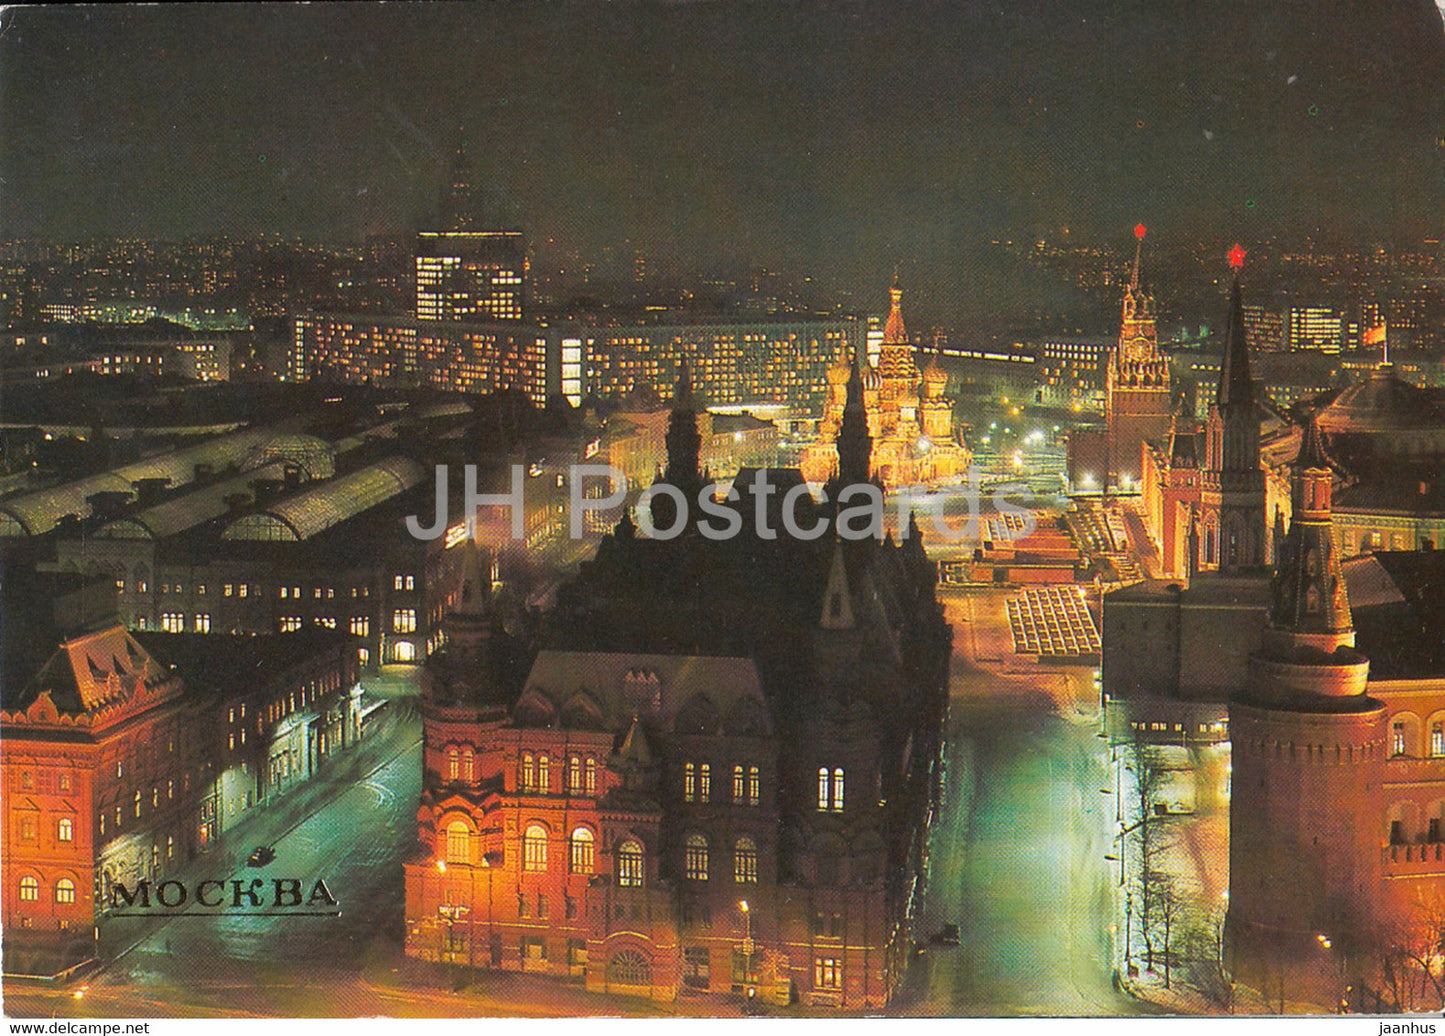 Moscow - A View of the History Museum and Red Square - 1984 - Russia USSR - used - JH Postcards